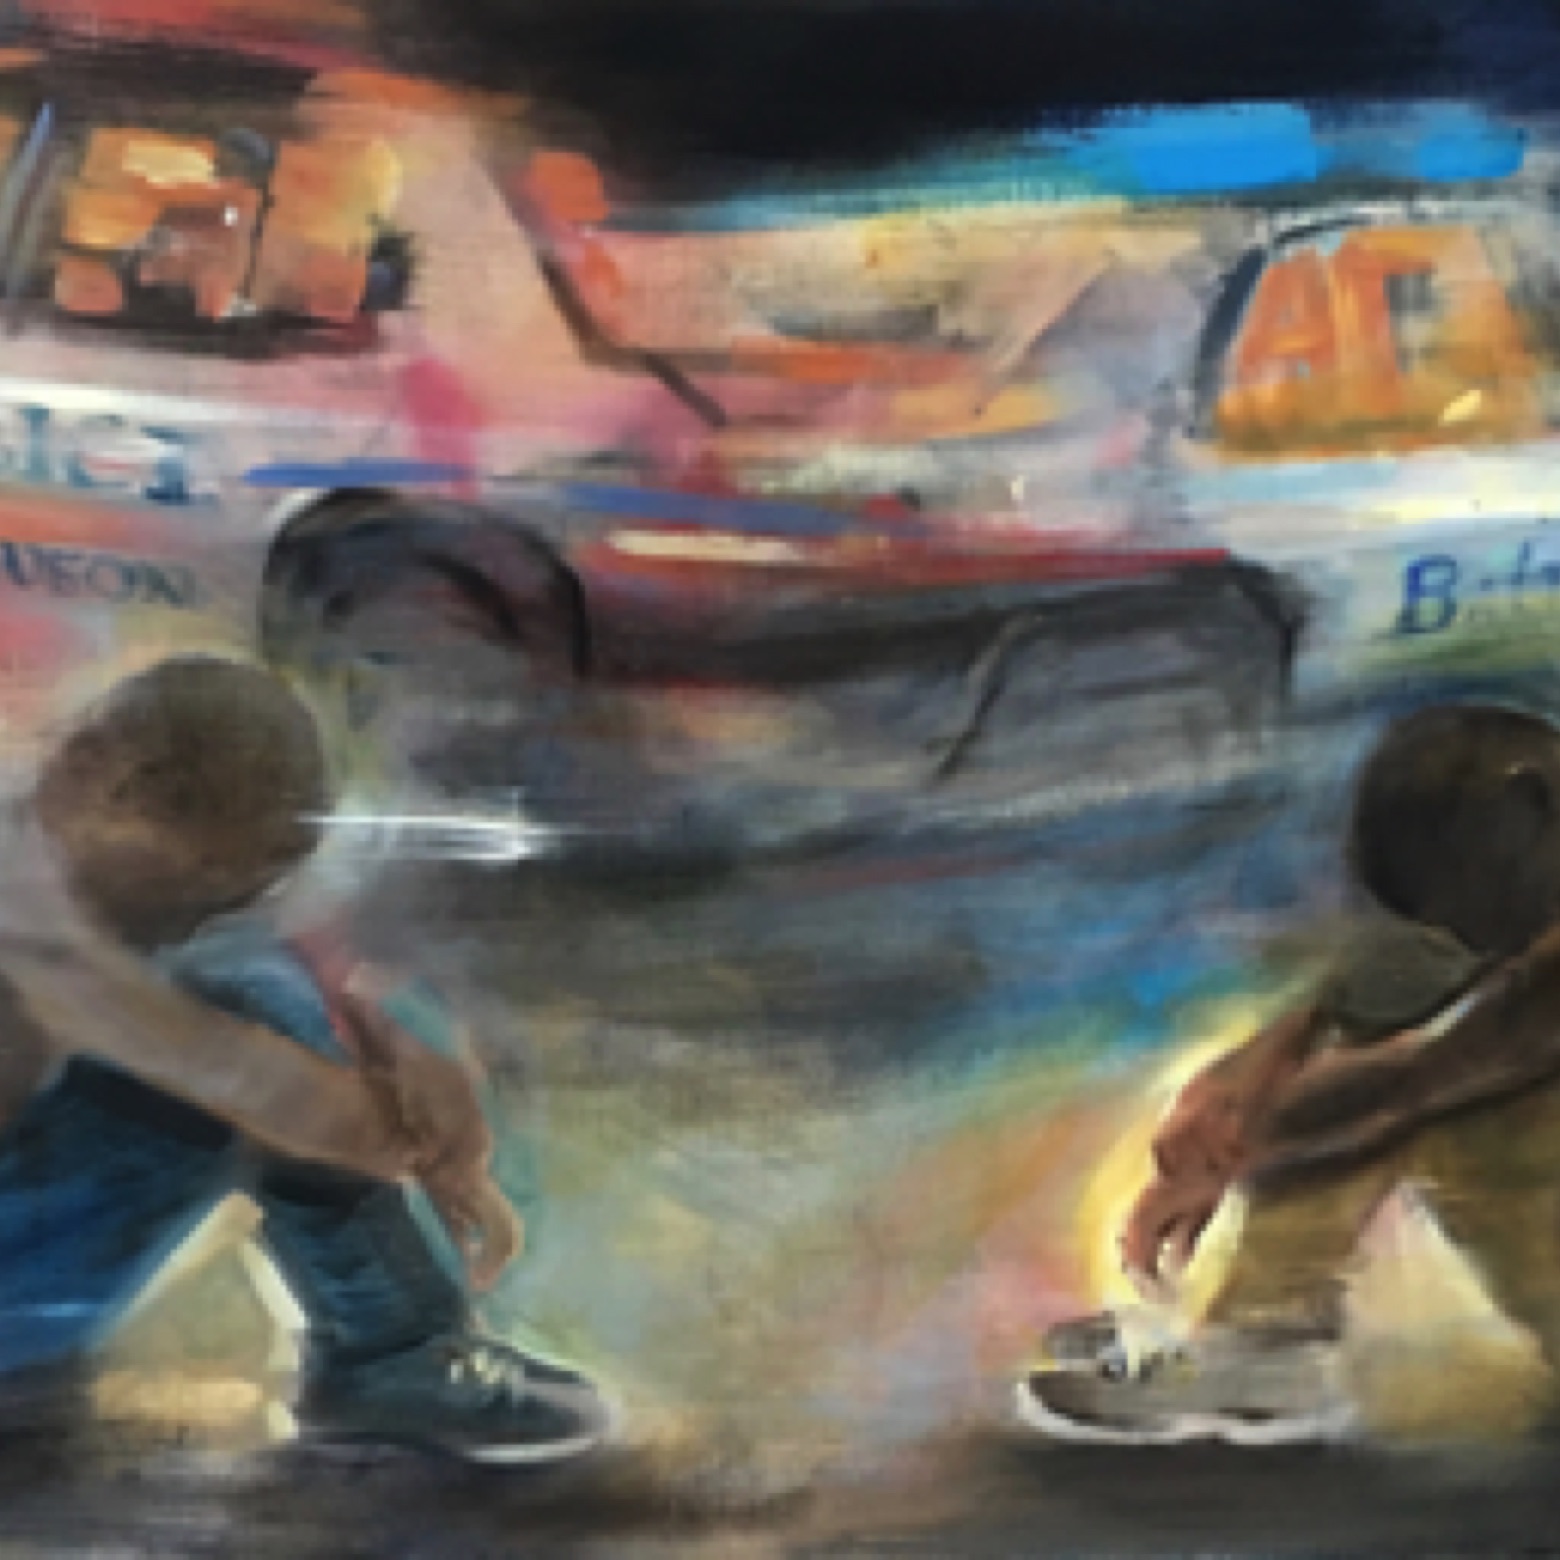 Gregg Chadwick
America's Sons: From Ferguson, to Baltimore, to Minneapolis
24"x48" oil on linen 2014-2021
On Exhibit in Facing Darkness, 18th Street Art Center 
In dialogue with Call and Echo is America’s Sons: From Ferguson, to Baltimore, to Minneapolis. Inspired by the poetry of Langston Hughes, the words and advocacy of Ta-Nehisi Coates, DeRay McKesson, Nikole Hannah-Jones, and Black Lives Matter — my painting turns a spotlight on the stories of young black men who face racial profiling, harassment and often death at the hands of police in the US.